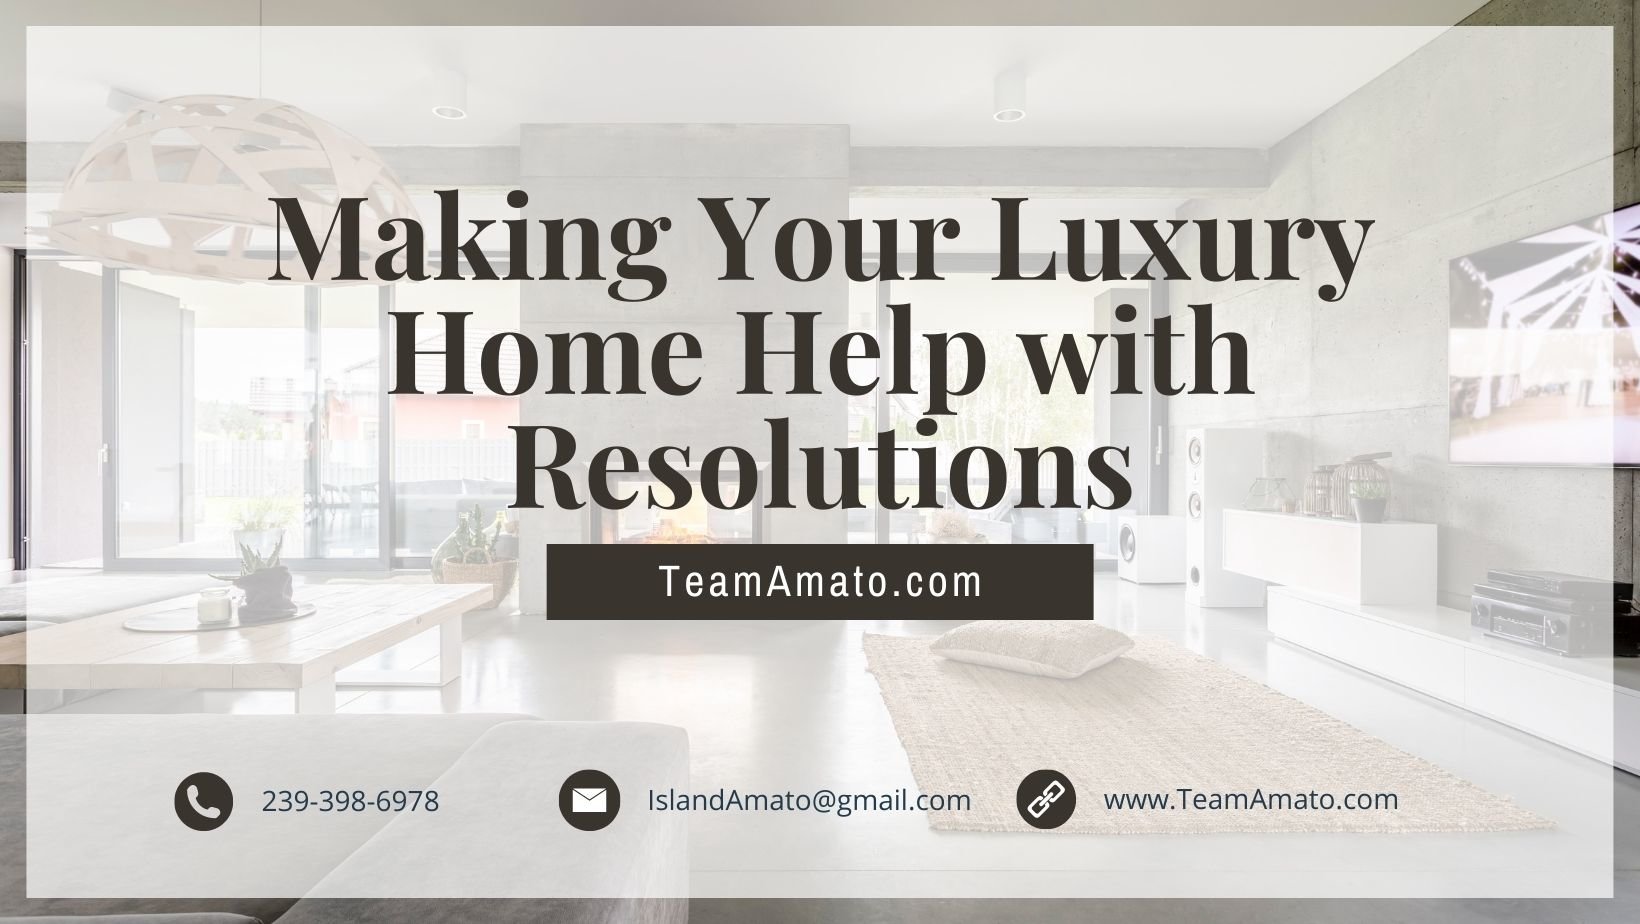 Making Your Luxury Home Help with Resolutions